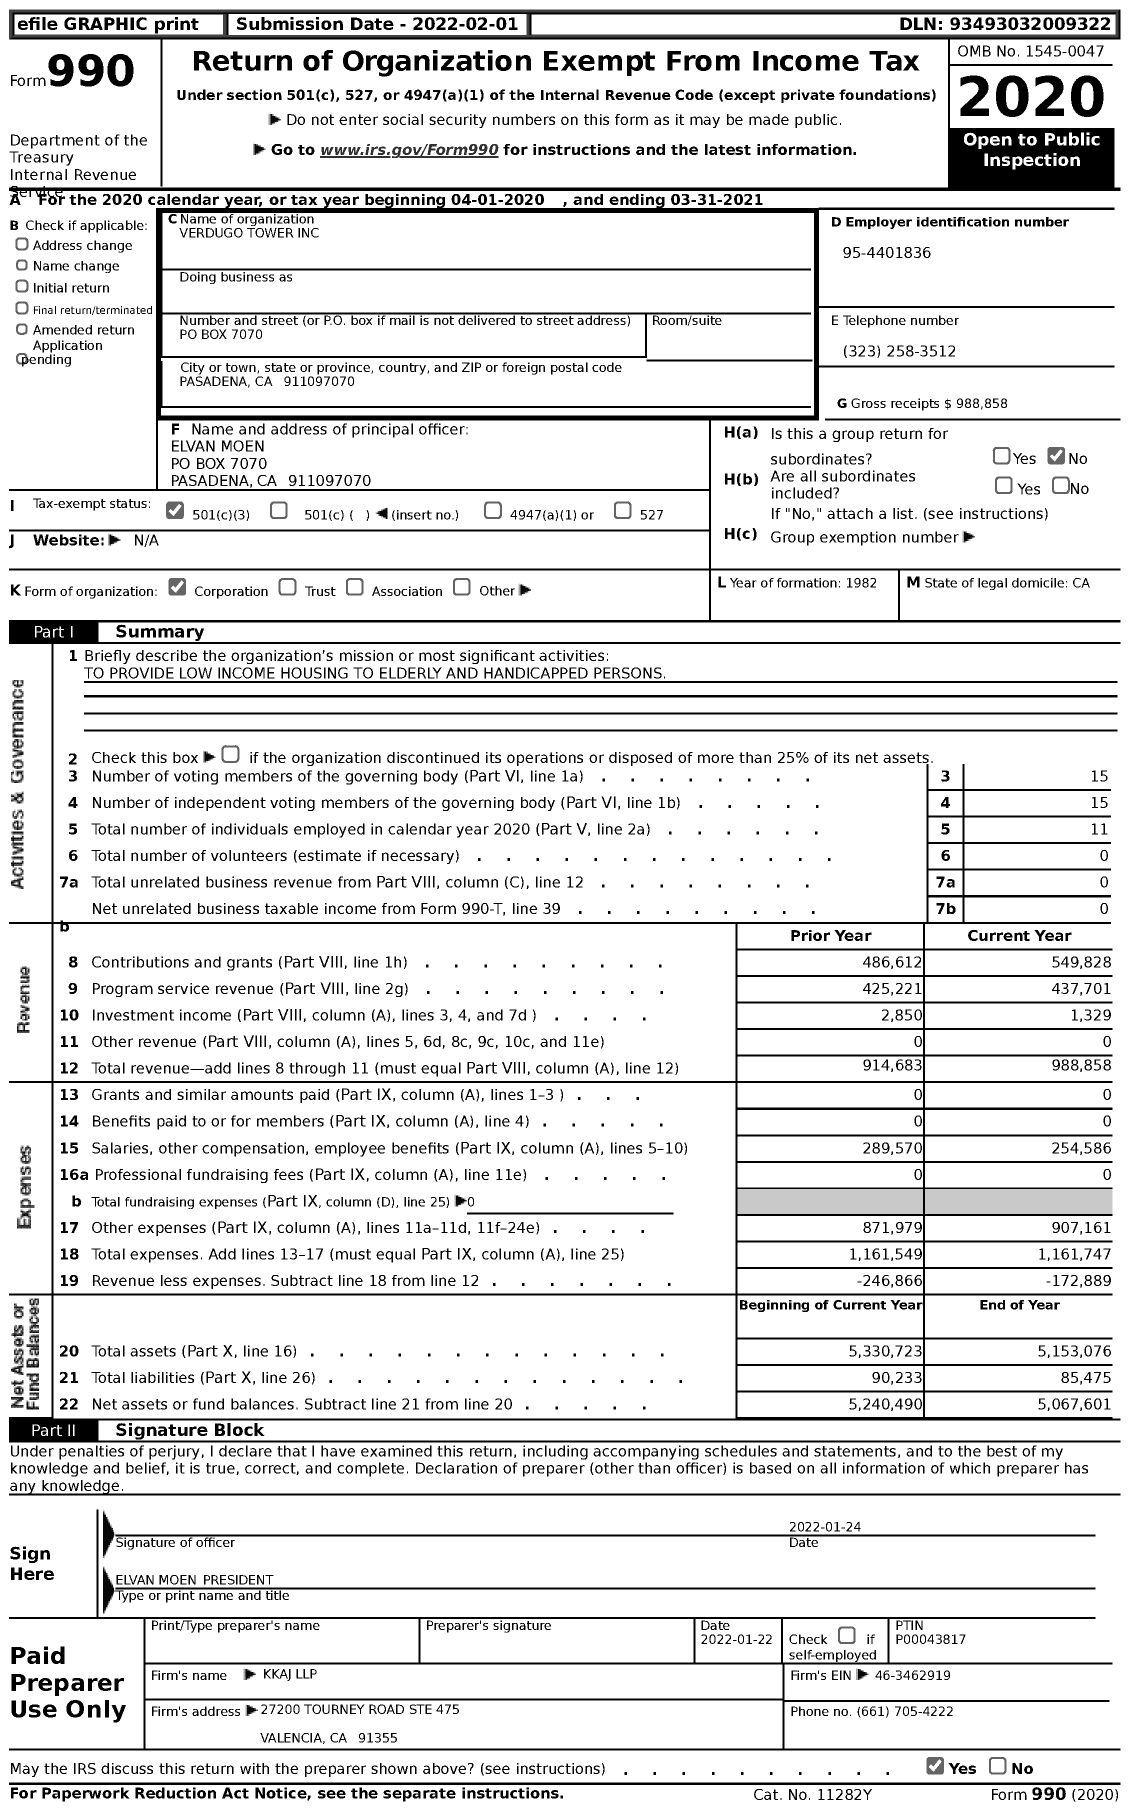 Image of first page of 2020 Form 990 for Verdugo Tower